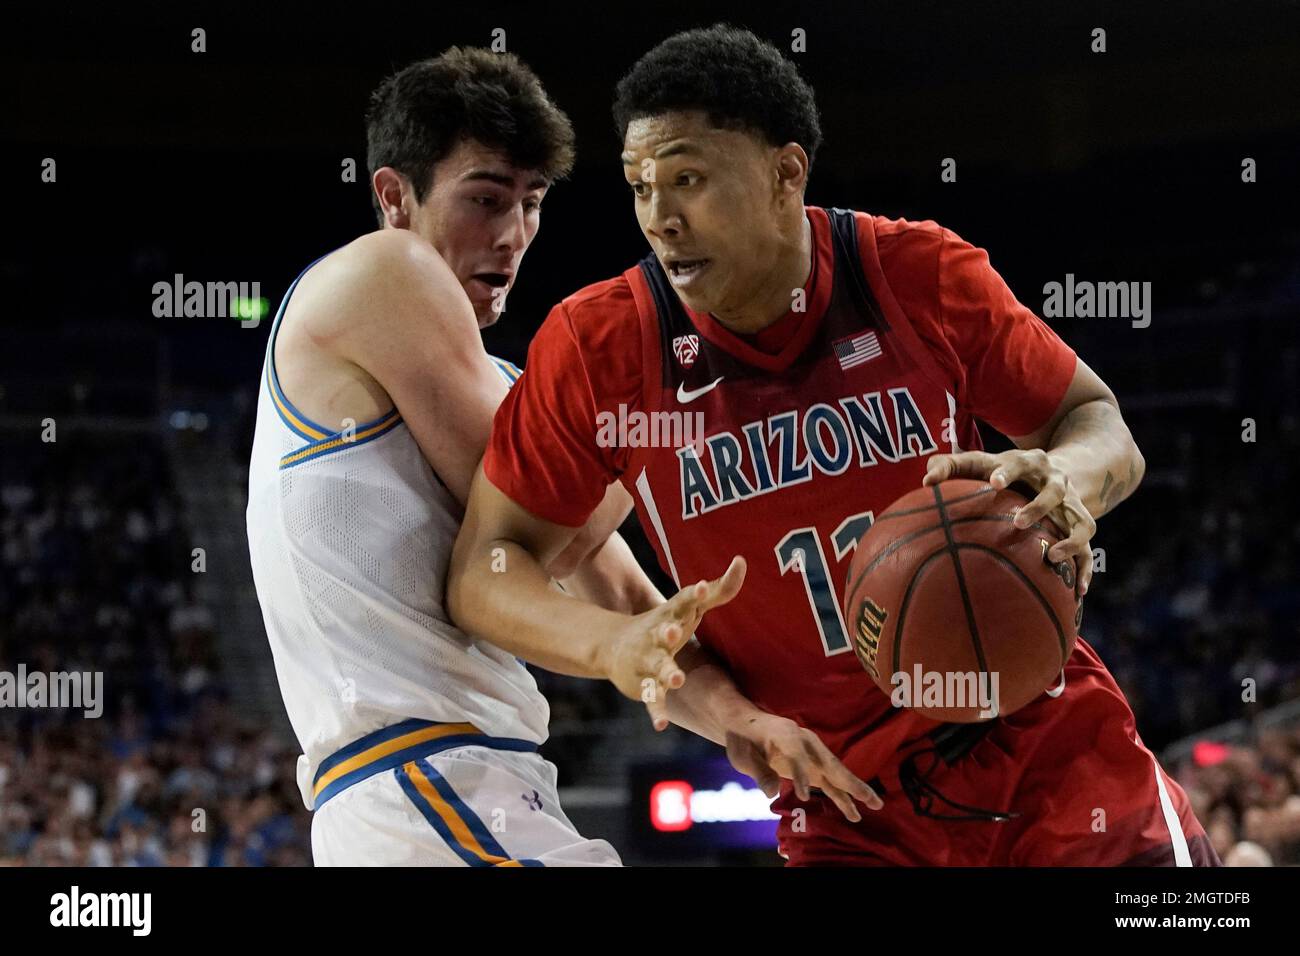 Arizona forward Ira Lee, right, drives around UCLA guard Jaime Jaquez Jr.  during the first half of an NCAA college basketball game in Los Angeles,  Saturday, Feb. 29, 2020. (AP Photo/Chris Carlson